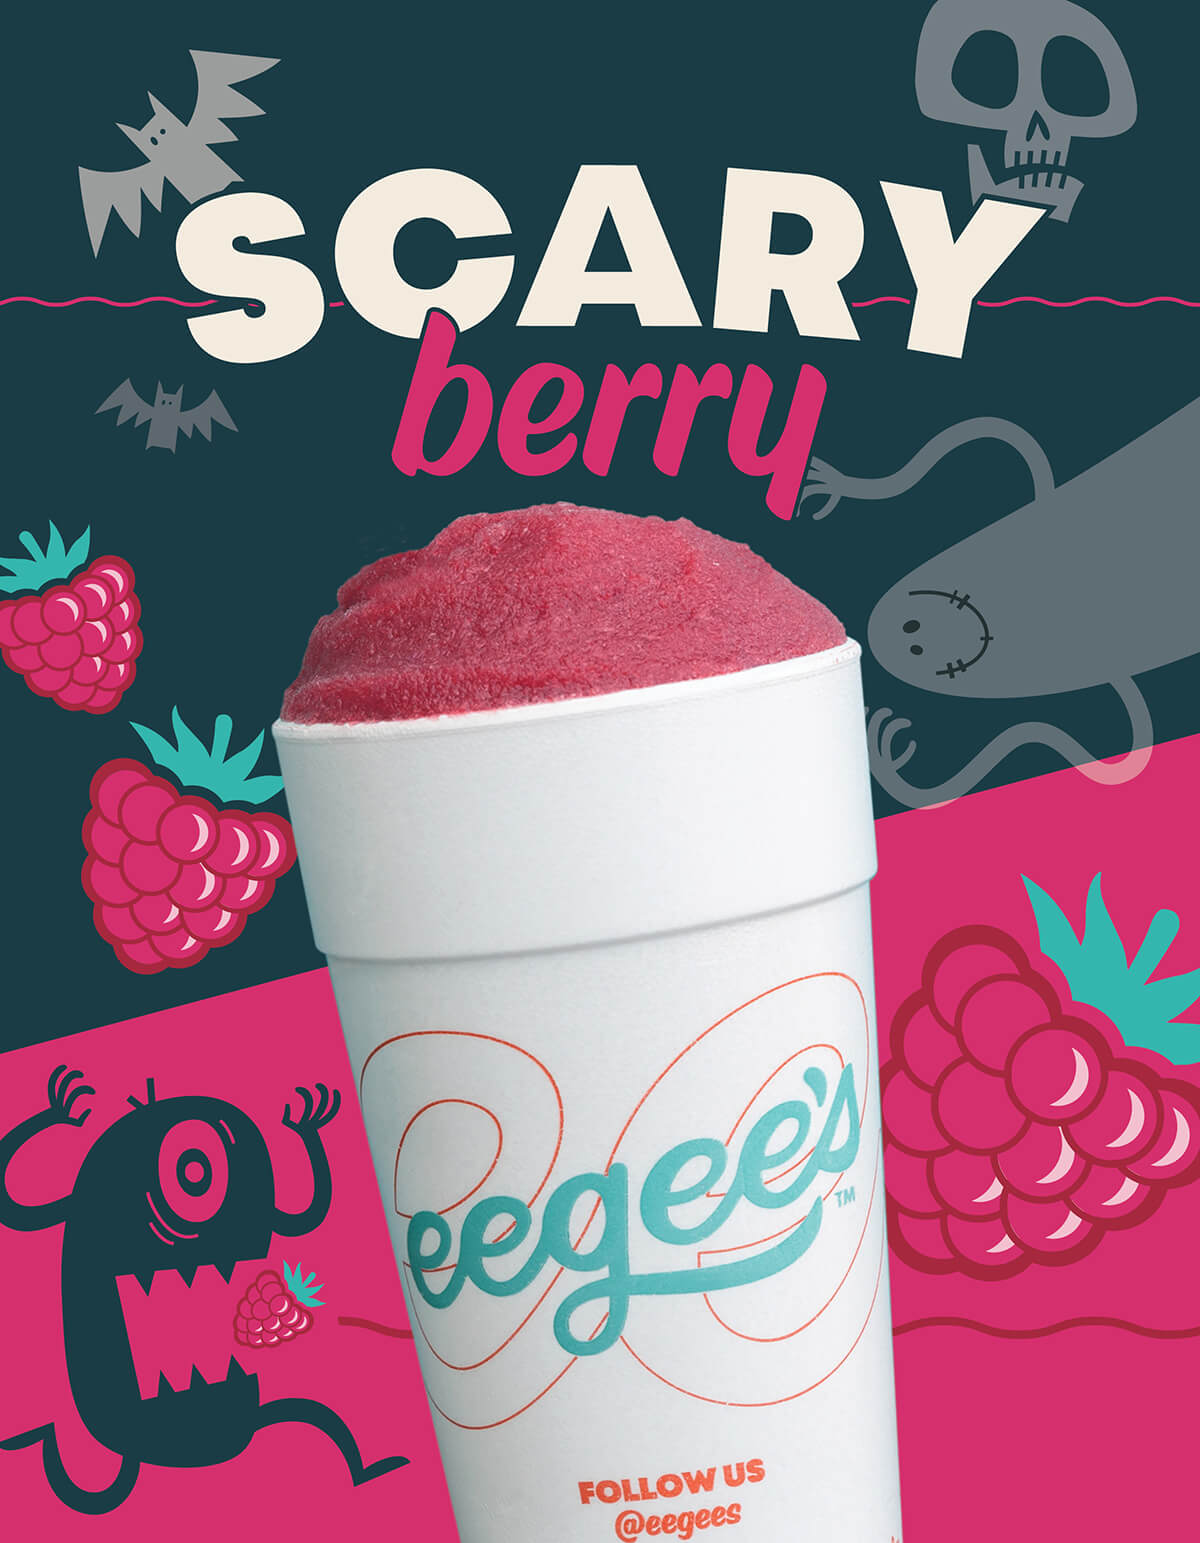 Scary berry poster